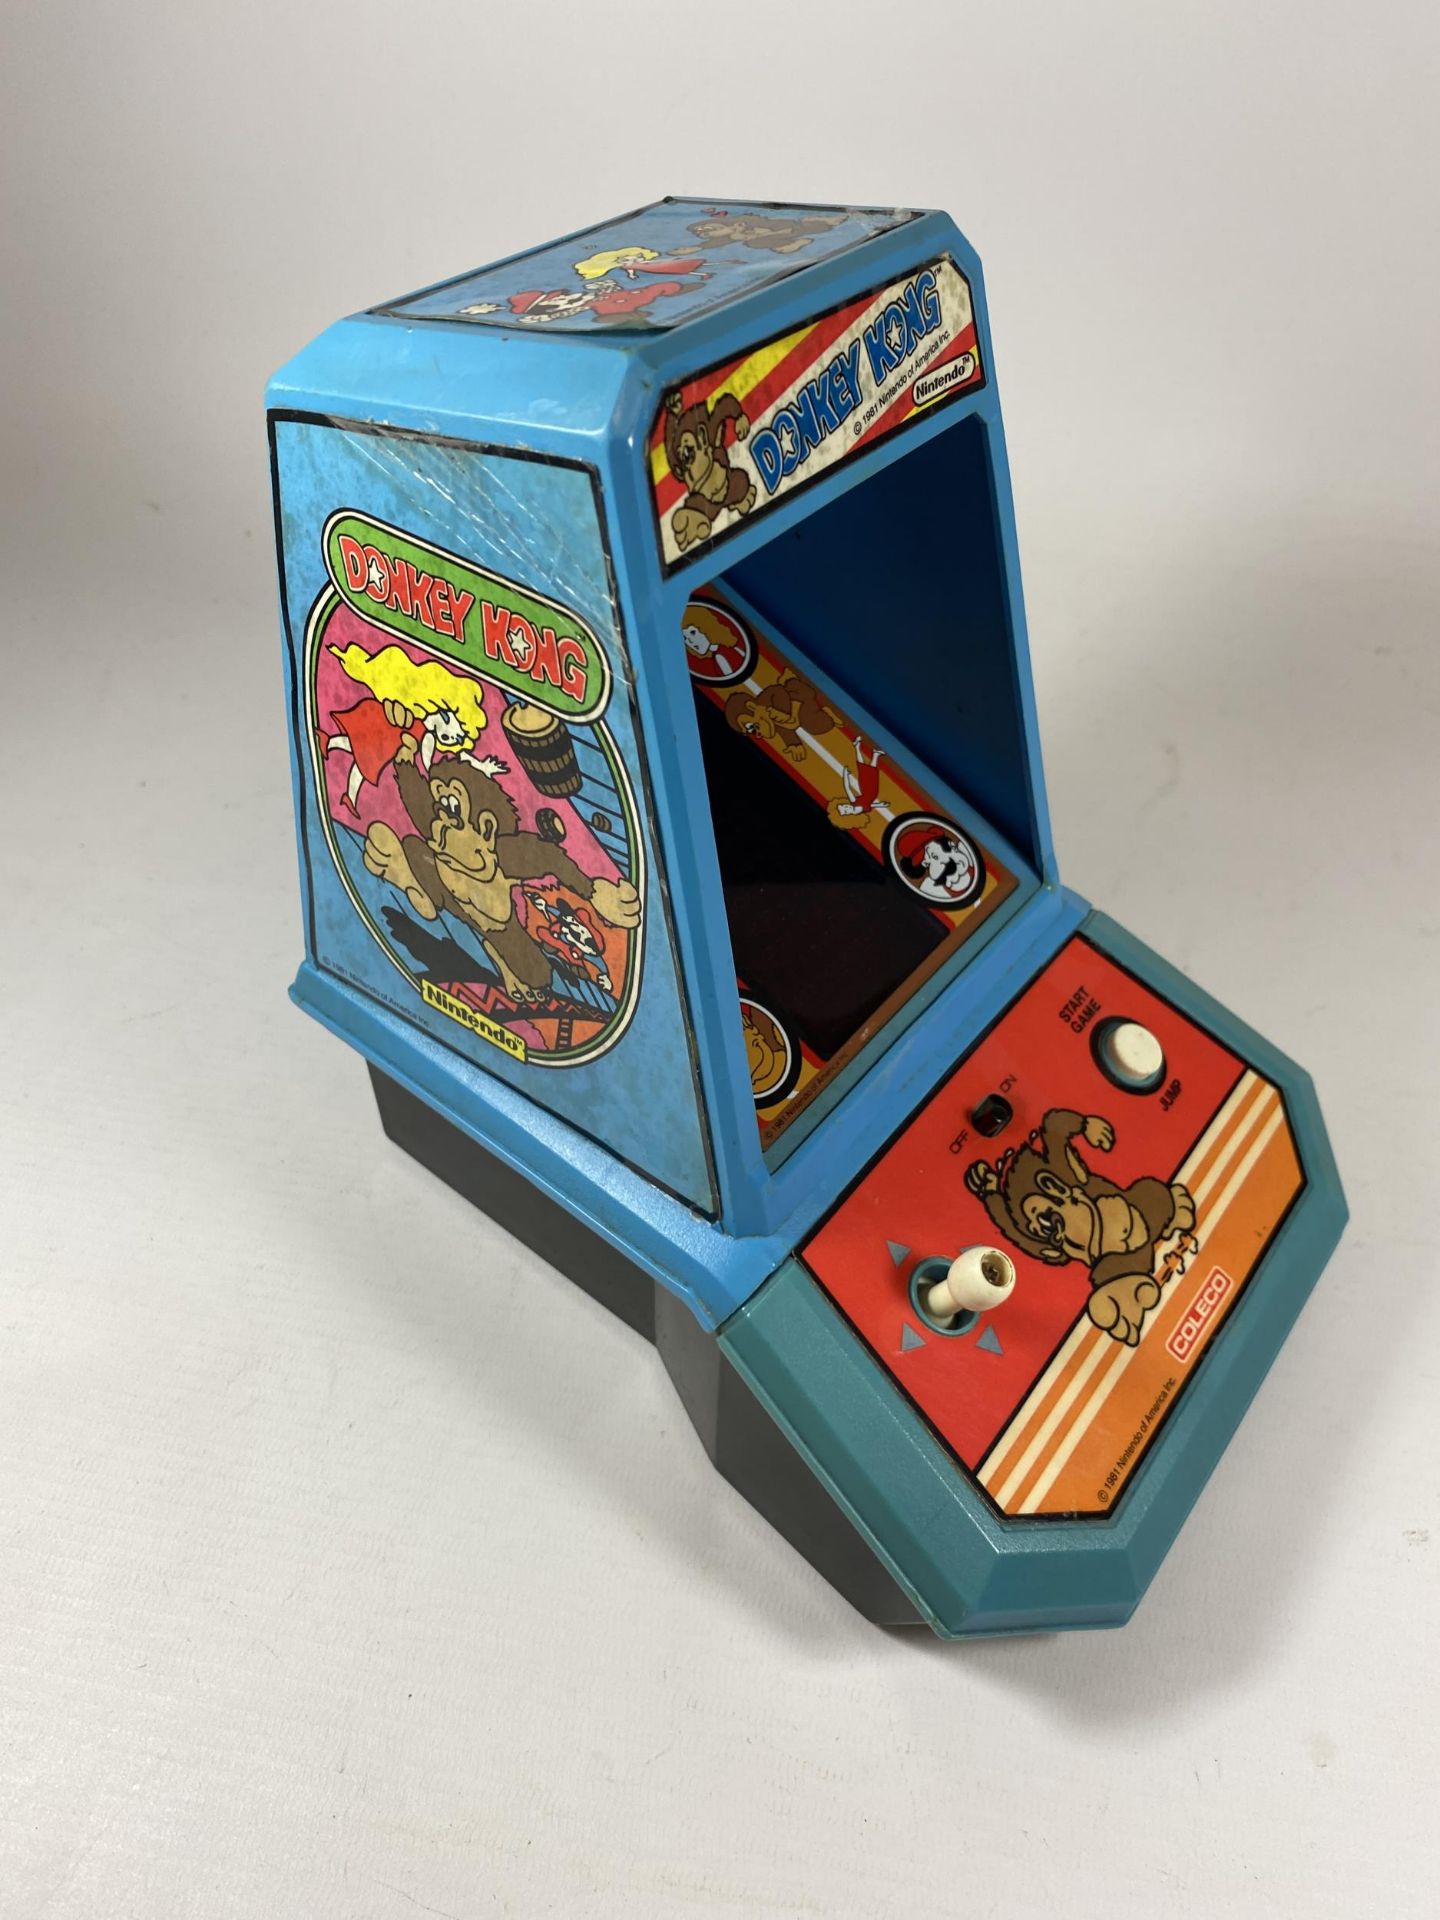 A RETRO 1981 COLECO DONKEY KONG TABLE TOP ARCADE GAME - Image 4 of 6